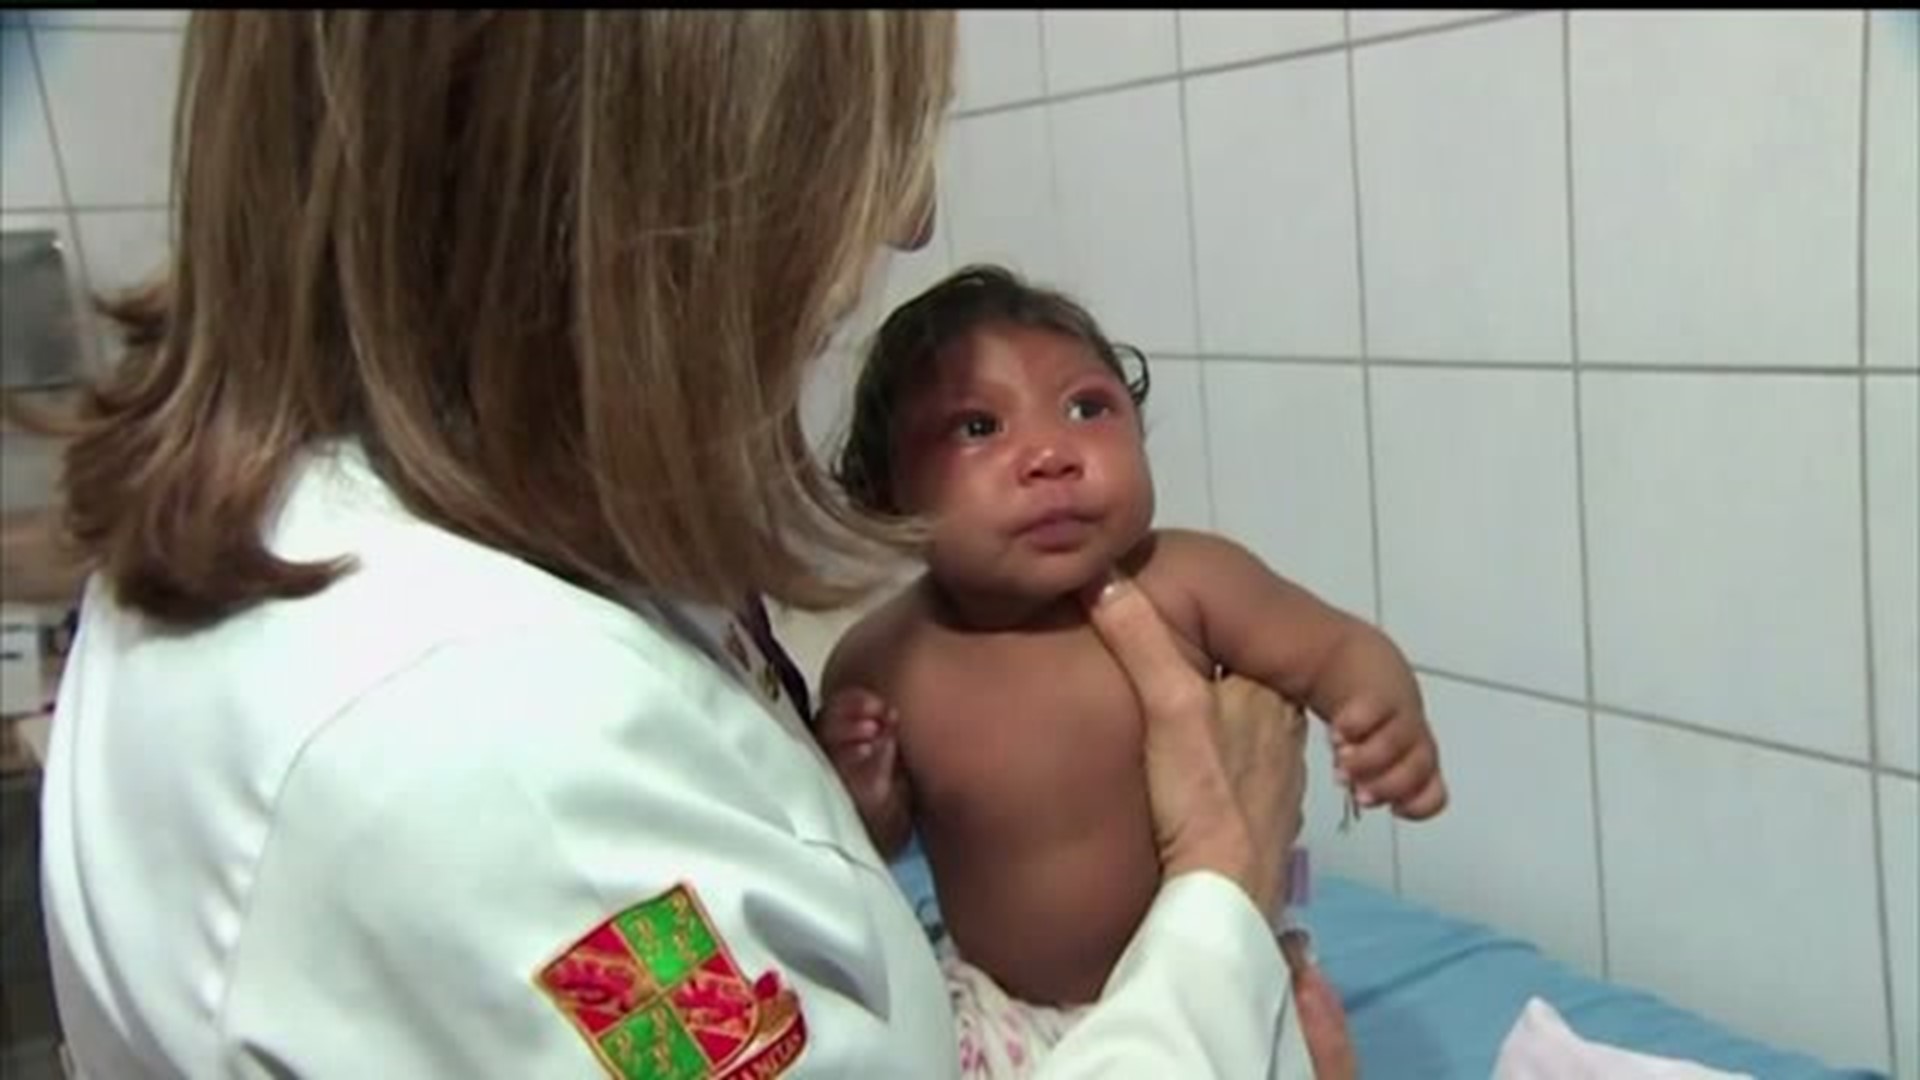 CDC says Zika is more serious than first thought